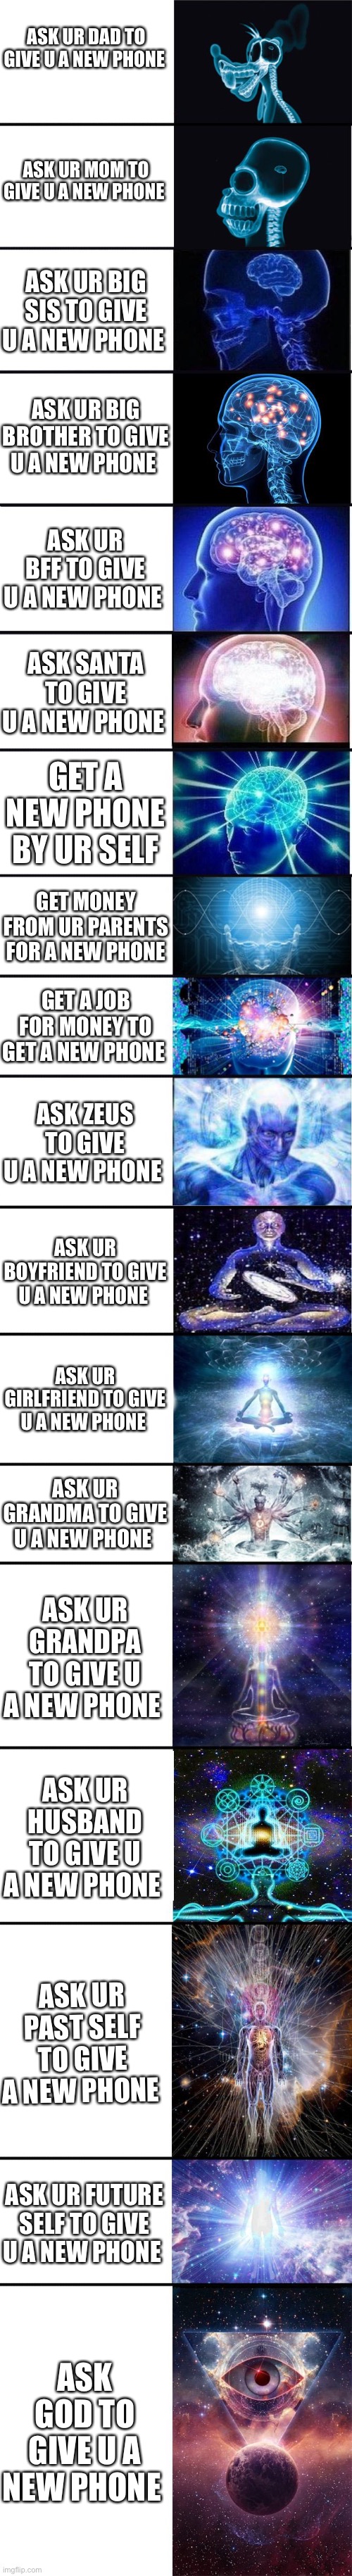 expanding brain: 9001 | ASK UR DAD TO GIVE U A NEW PHONE; ASK UR MOM TO GIVE U A NEW PHONE; ASK UR BIG SIS TO GIVE U A NEW PHONE; ASK UR BIG BROTHER TO GIVE U A NEW PHONE; ASK UR BFF TO GIVE U A NEW PHONE; ASK SANTA TO GIVE U A NEW PHONE; GET A NEW PHONE BY UR SELF; GET MONEY FROM UR PARENTS FOR A NEW PHONE; GET A JOB FOR MONEY TO GET A NEW PHONE; ASK ZEUS TO GIVE U A NEW PHONE; ASK UR BOYFRIEND TO GIVE U A NEW PHONE; ASK UR GIRLFRIEND TO GIVE U A NEW PHONE; ASK UR GRANDMA TO GIVE U A NEW PHONE; ASK UR GRANDPA TO GIVE U A NEW PHONE; ASK UR HUSBAND TO GIVE U A NEW PHONE; ASK UR PAST SELF TO GIVE A NEW PHONE; ASK UR FUTURE SELF TO GIVE U A NEW PHONE; ASK GOD TO GIVE U A NEW PHONE | image tagged in expanding brain 9001 | made w/ Imgflip meme maker